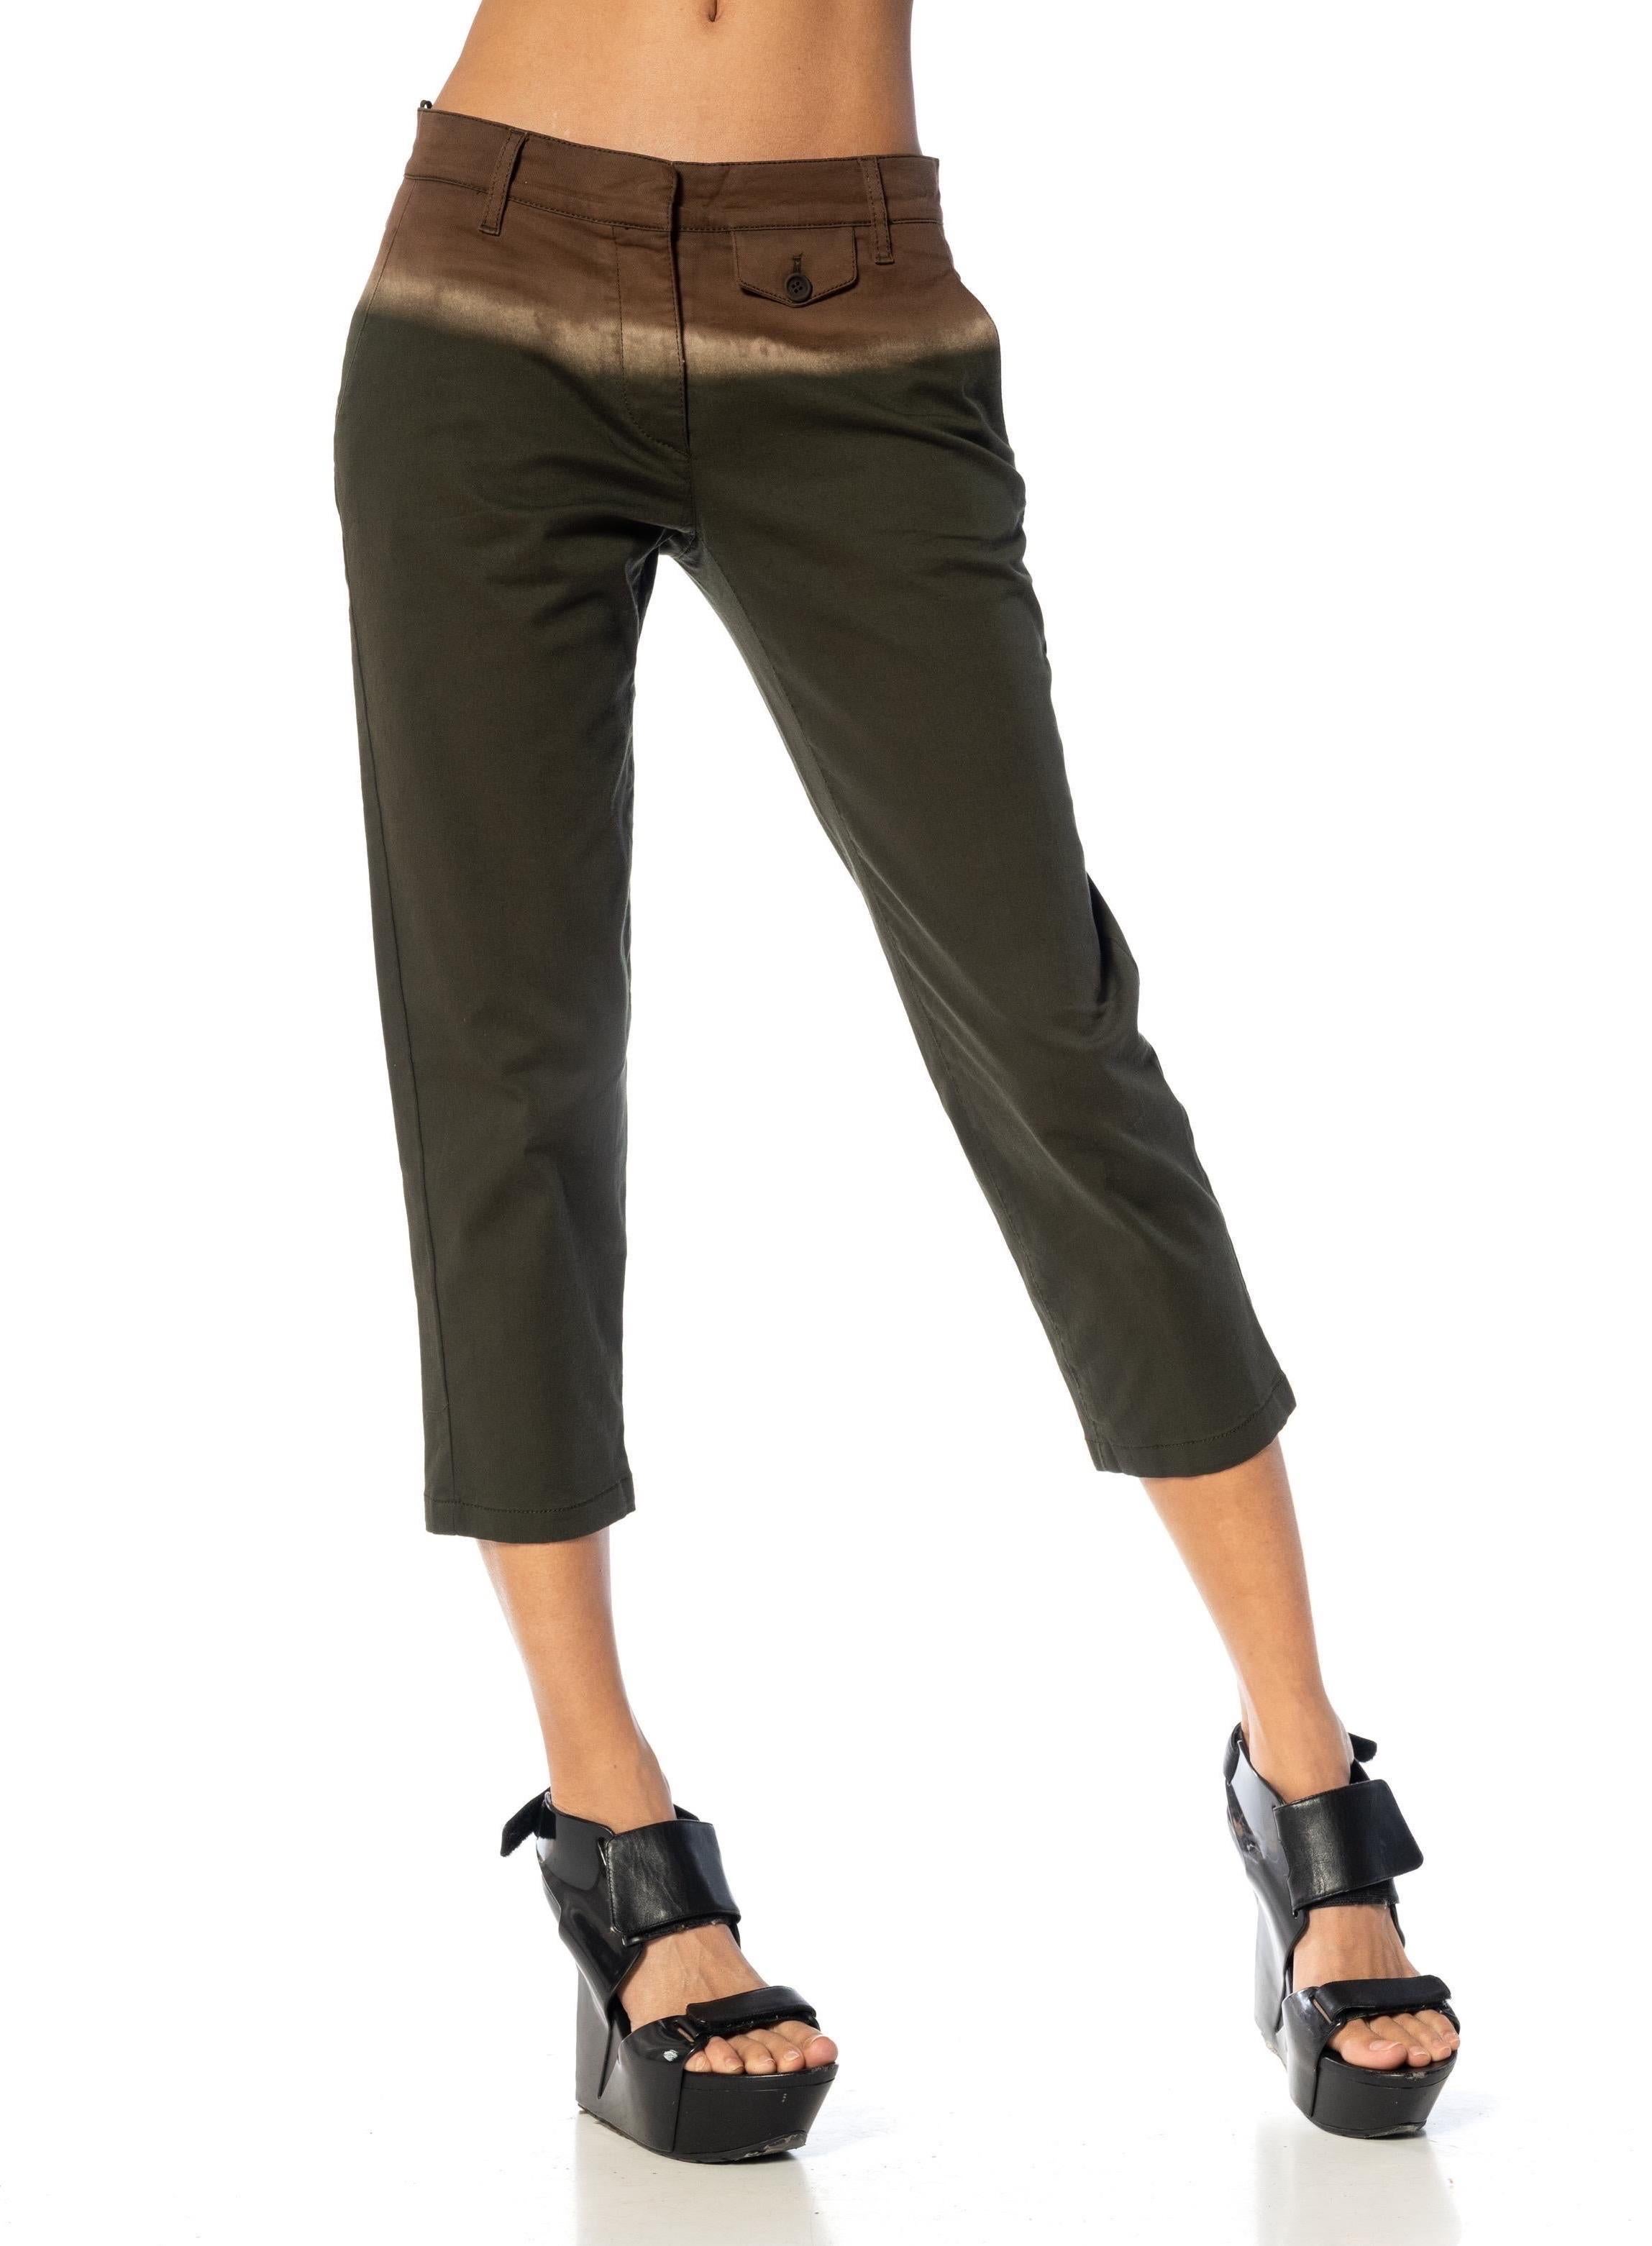 2000S PRADA Brown & Olive Green Cotton Pants For Sale 6